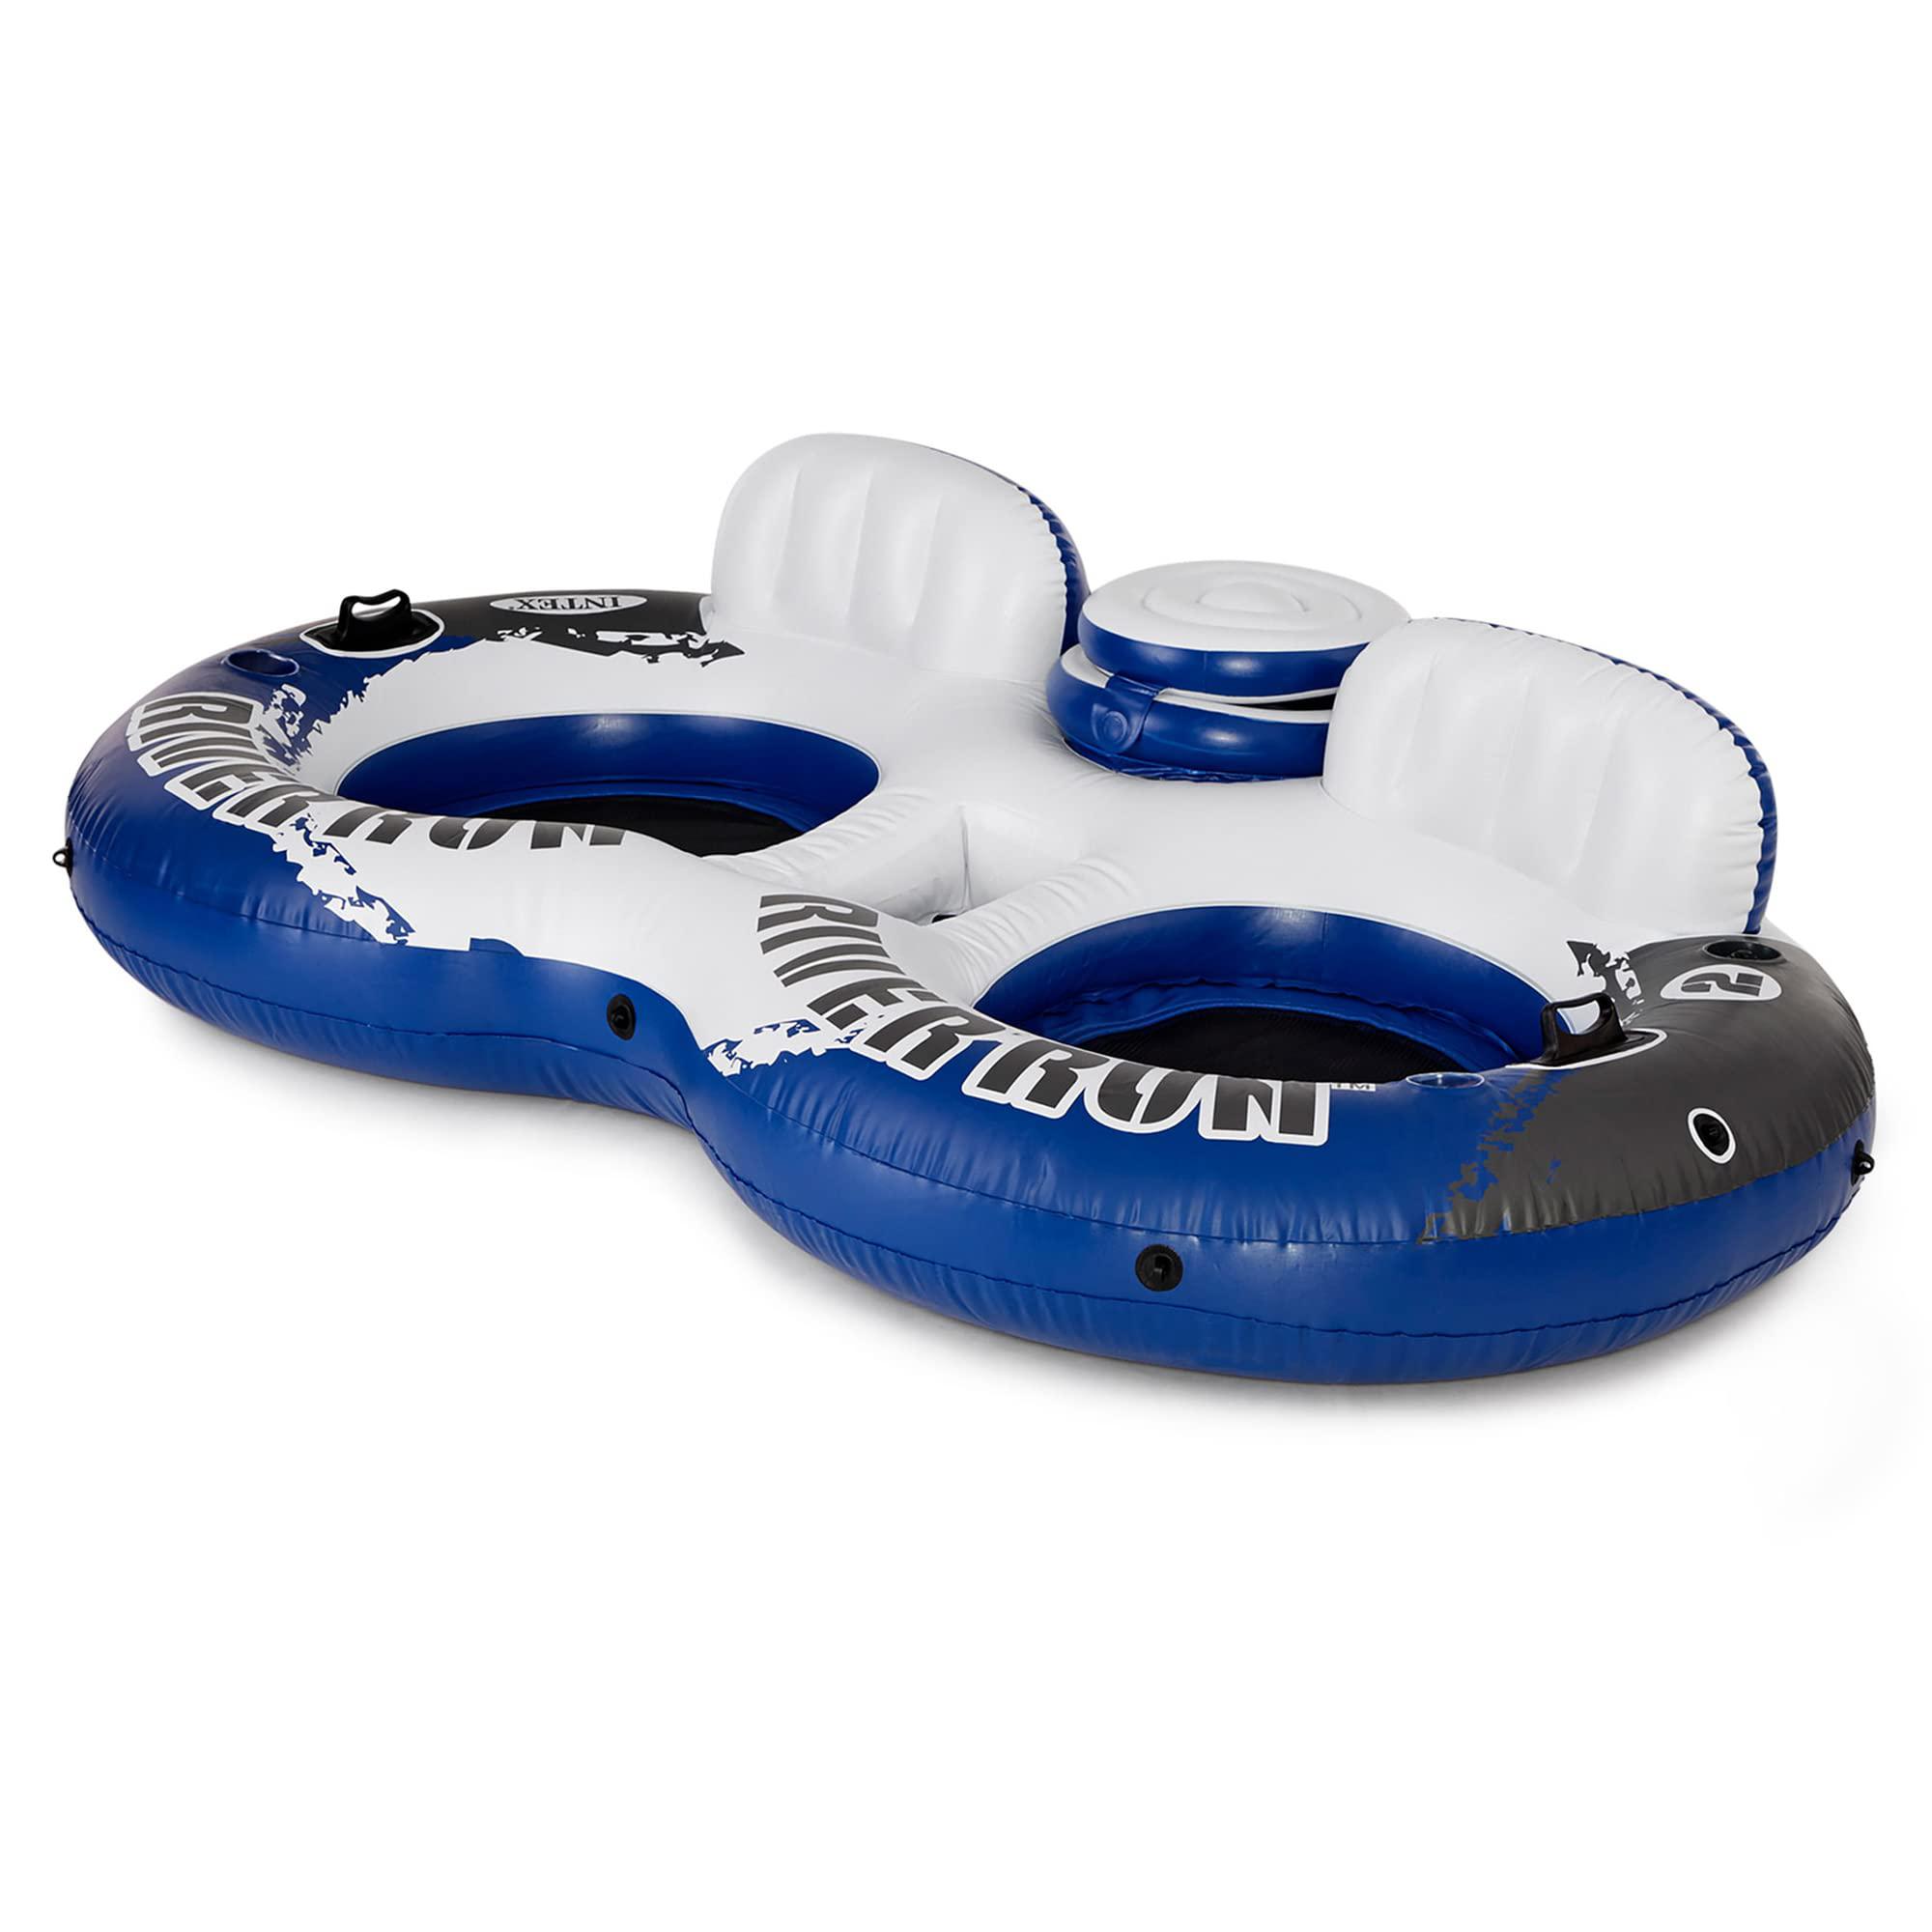 intex river run ii inflatable double rider inntertube with built-in cooler and cupholders with river run i single floating wa